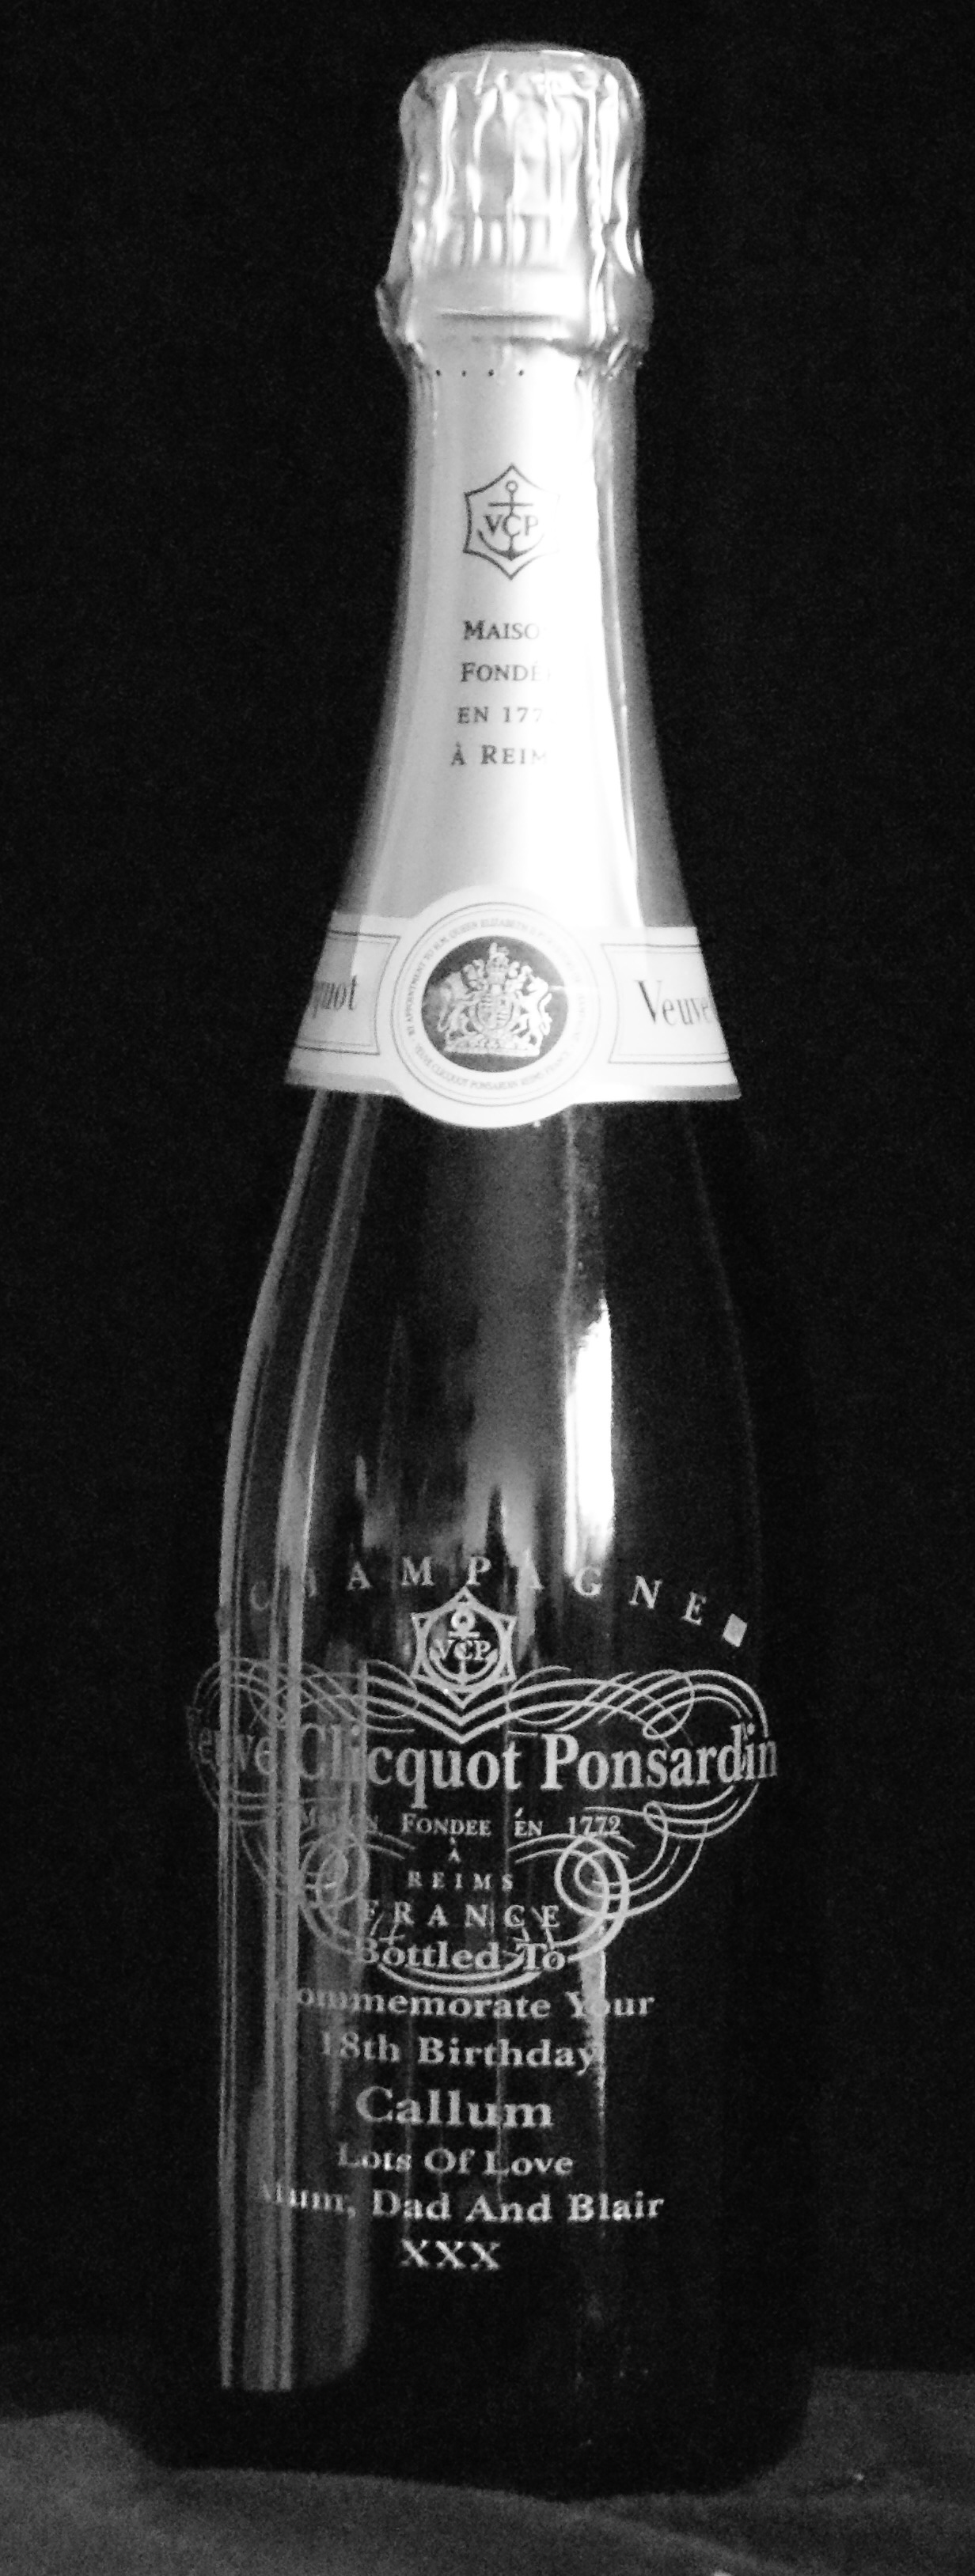 This is a photograph of a bottle of Champagne with the label removed and an image  of it engraved on to that position with a personal message also.